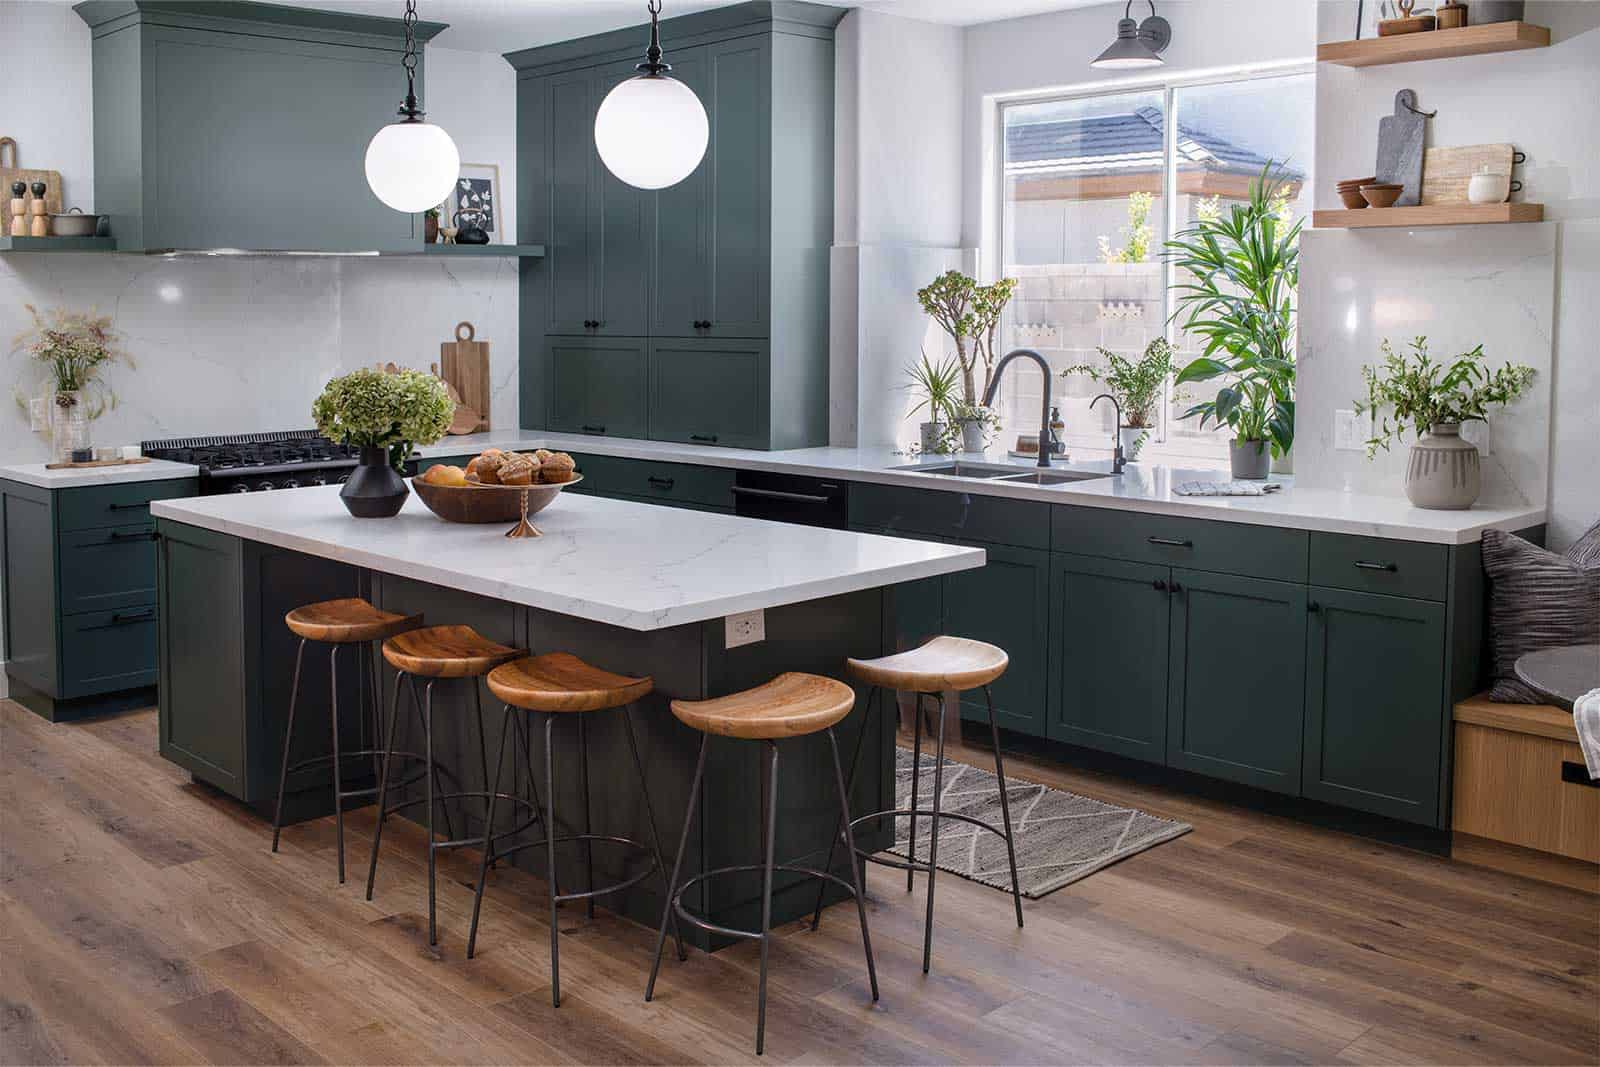 green kitchen ideas, property brothers forever home season 4